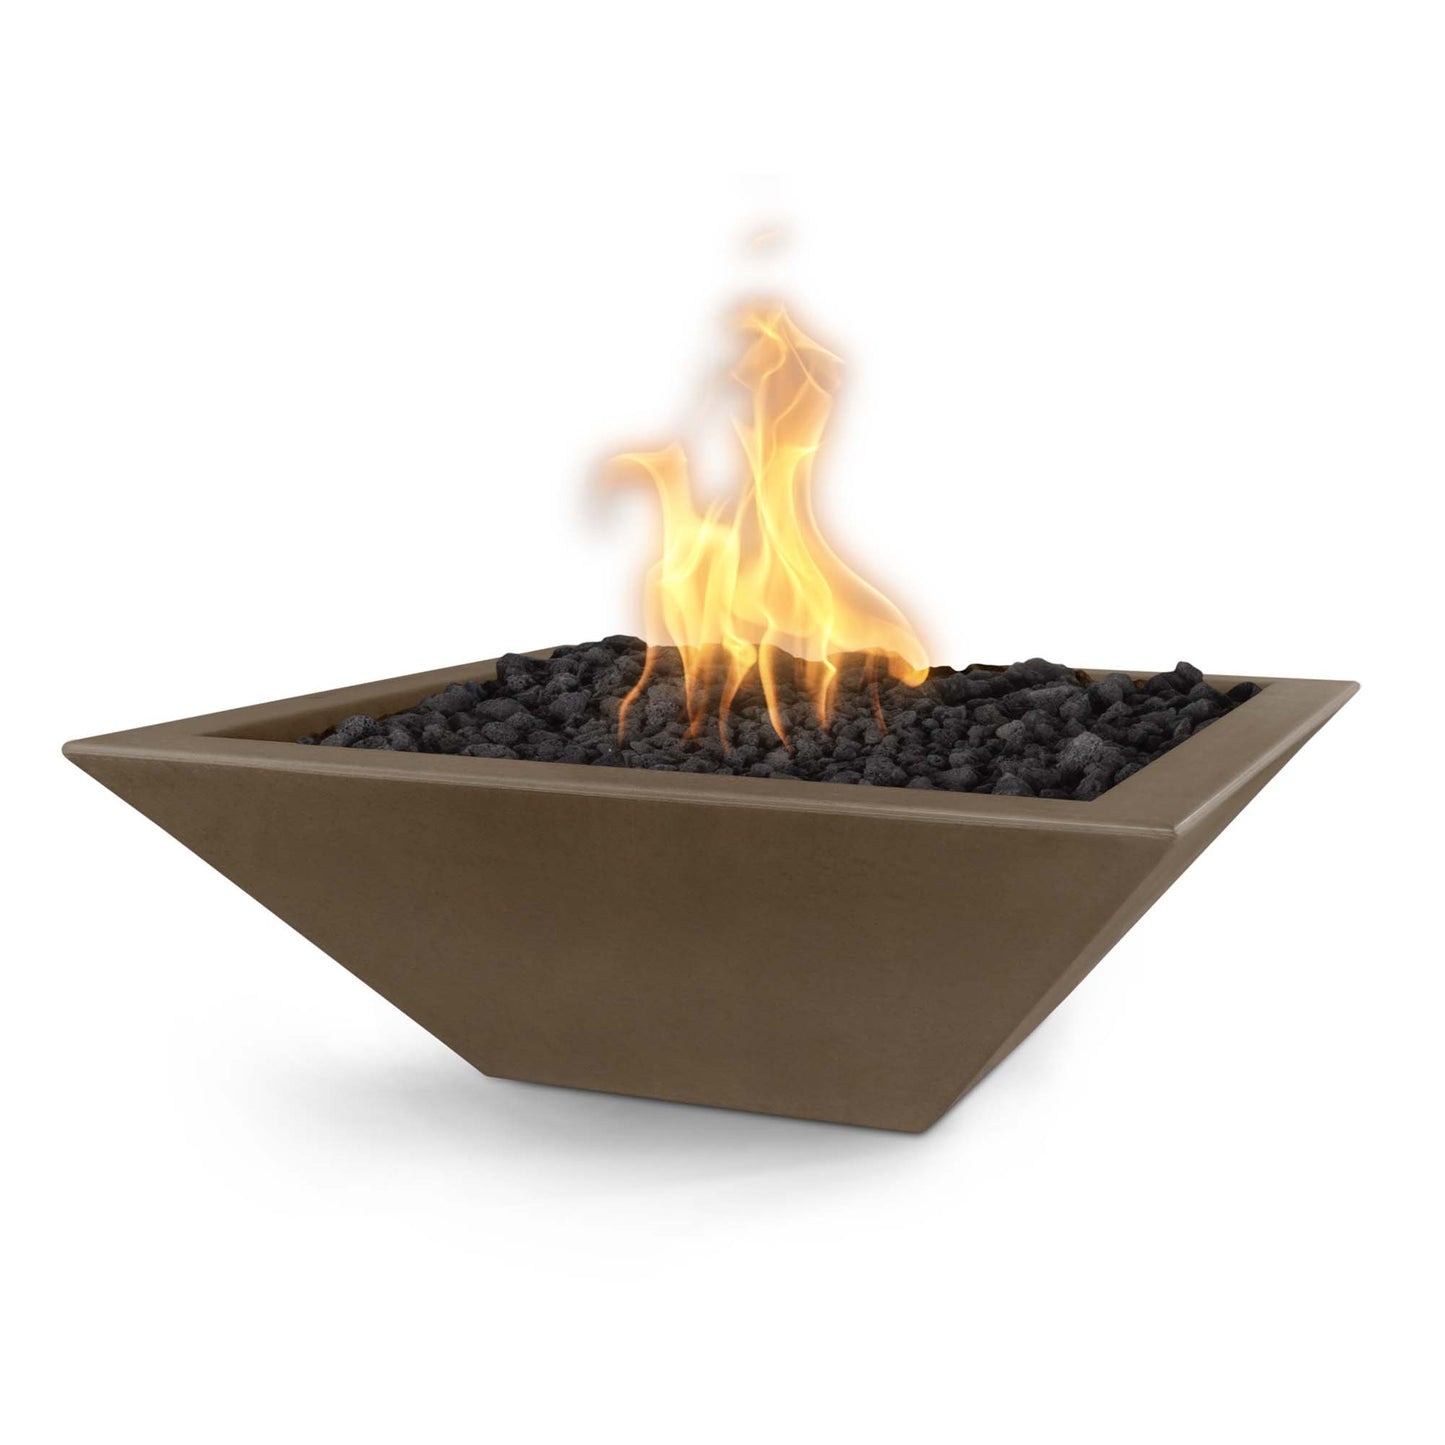 The Outdoor Plus Square Maya 36" Natural Gray GFRC Concrete Liquid Propane Fire Bowl with Match Lit with Flame Sense Ignition